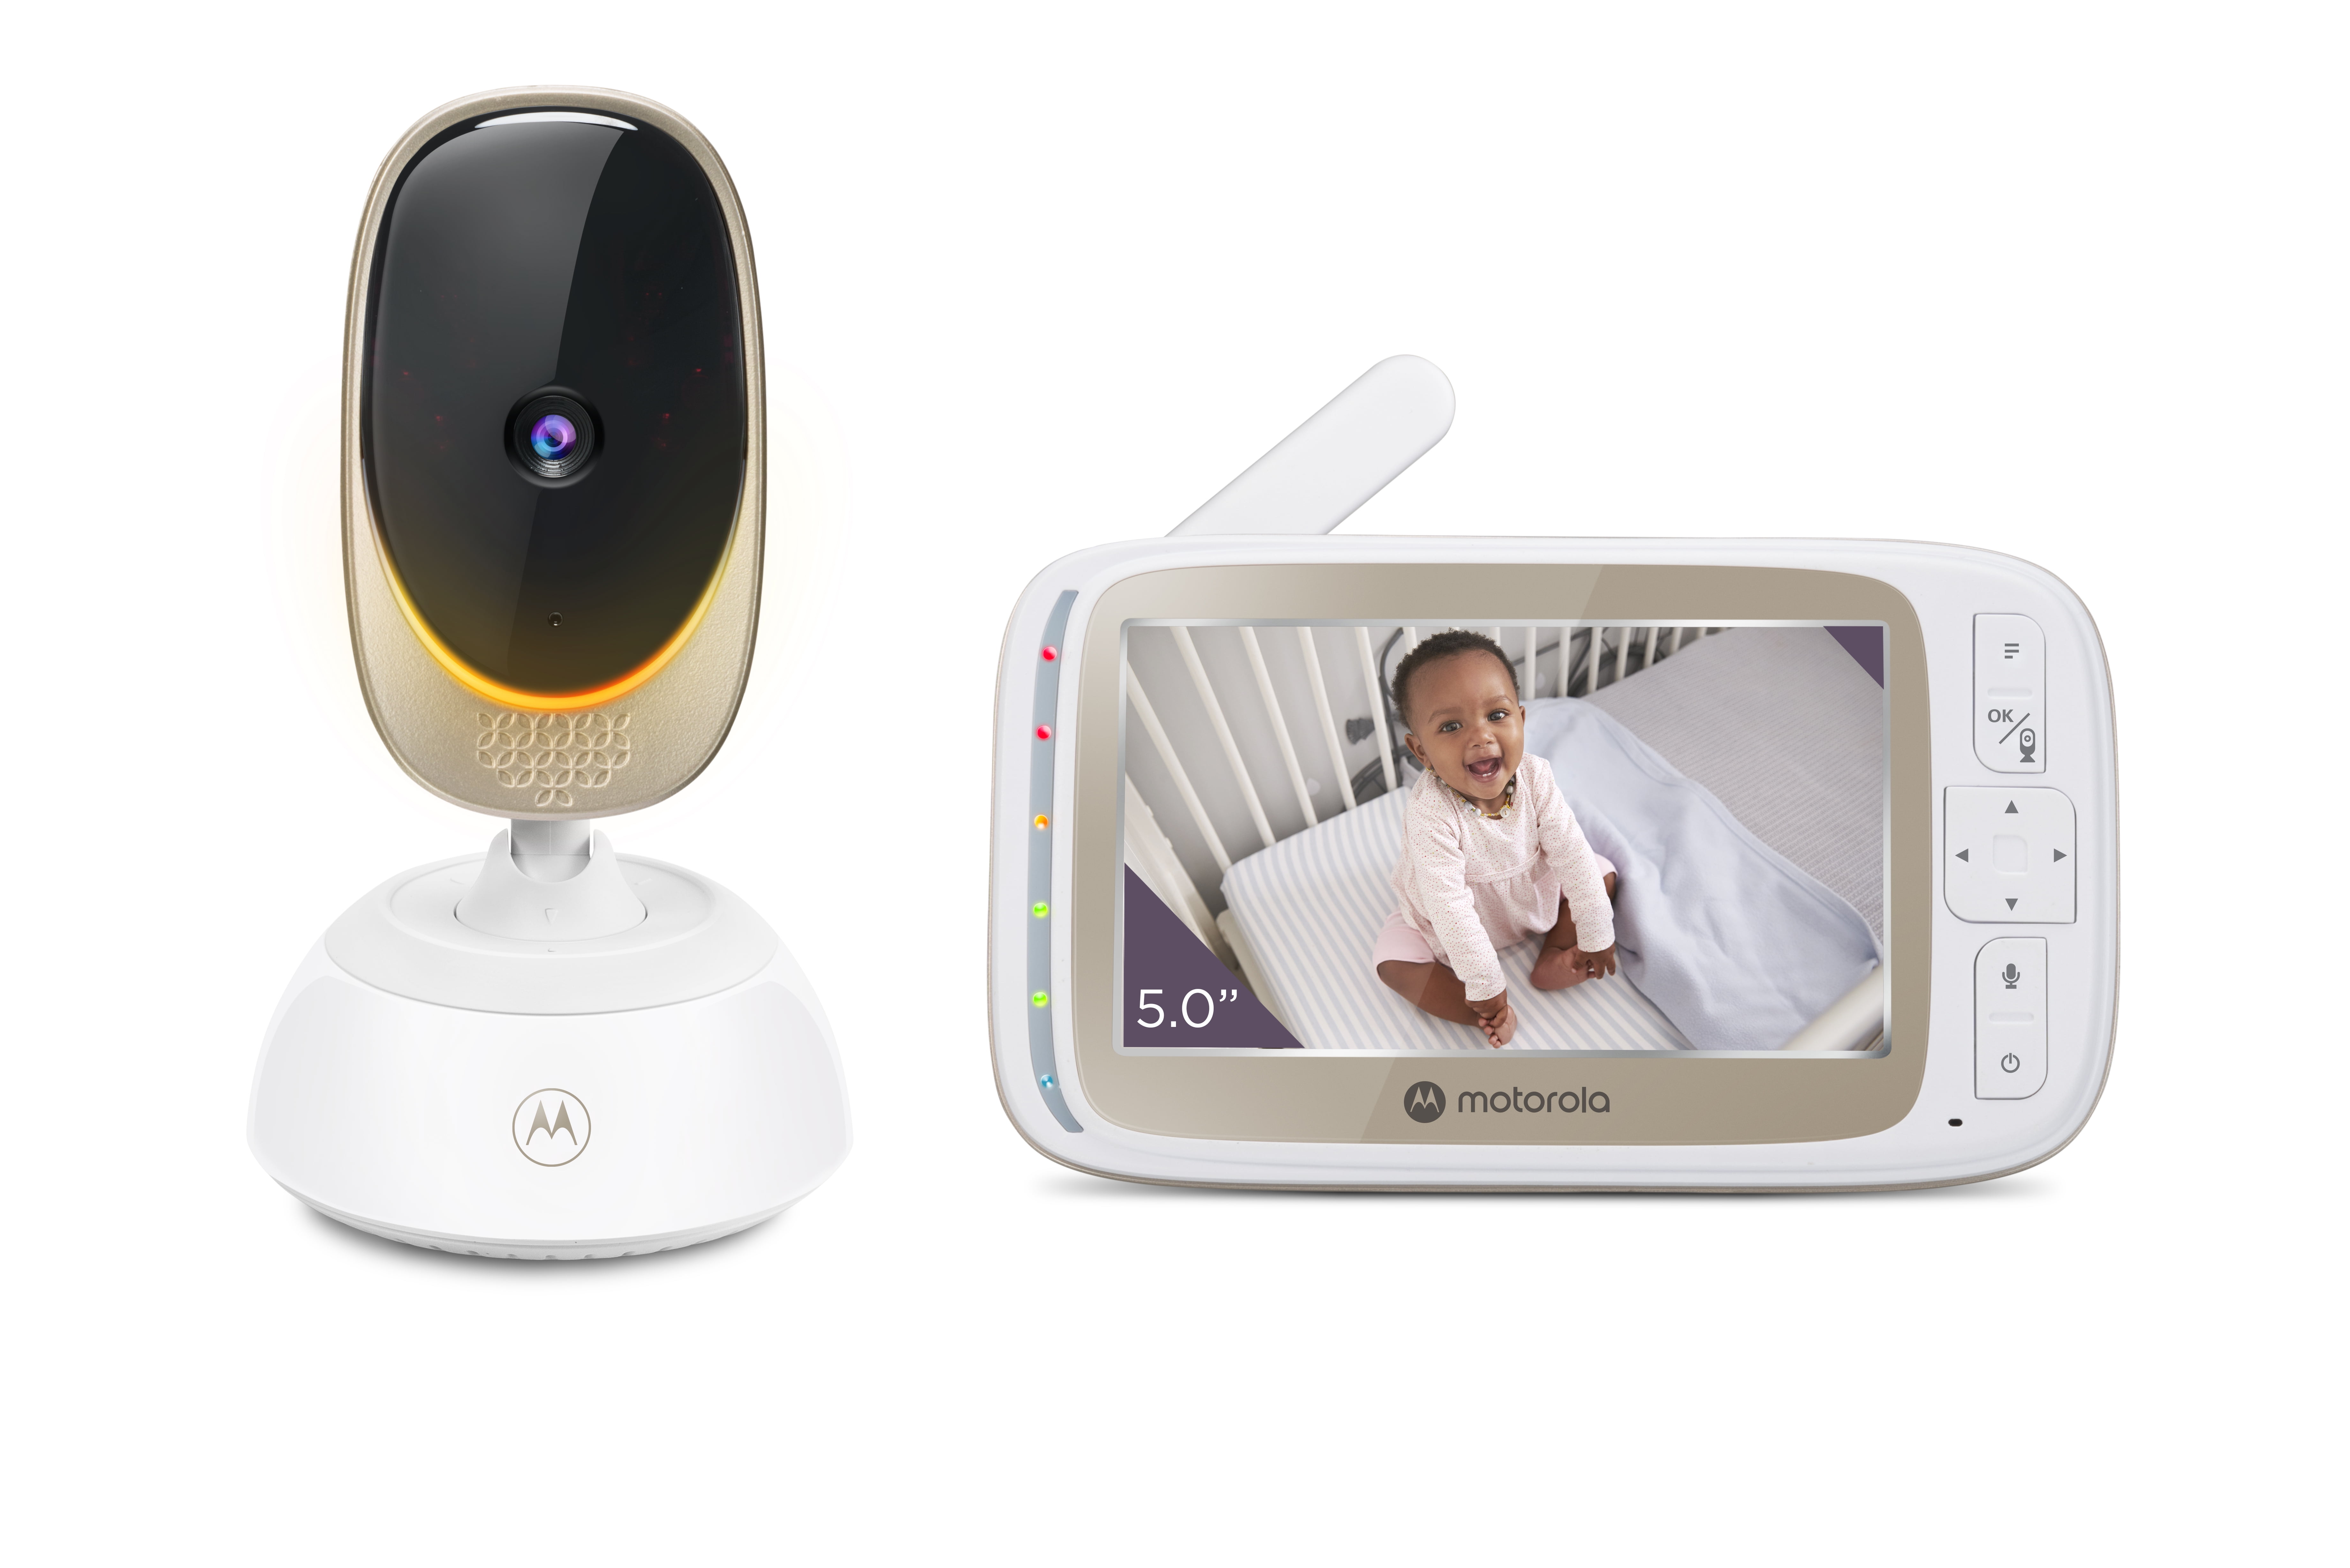 VTech Safe & Sound Owl Digital Video Baby Monitor review: Simplicity is the VTech  Baby Monitor's strength and weakness - CNET